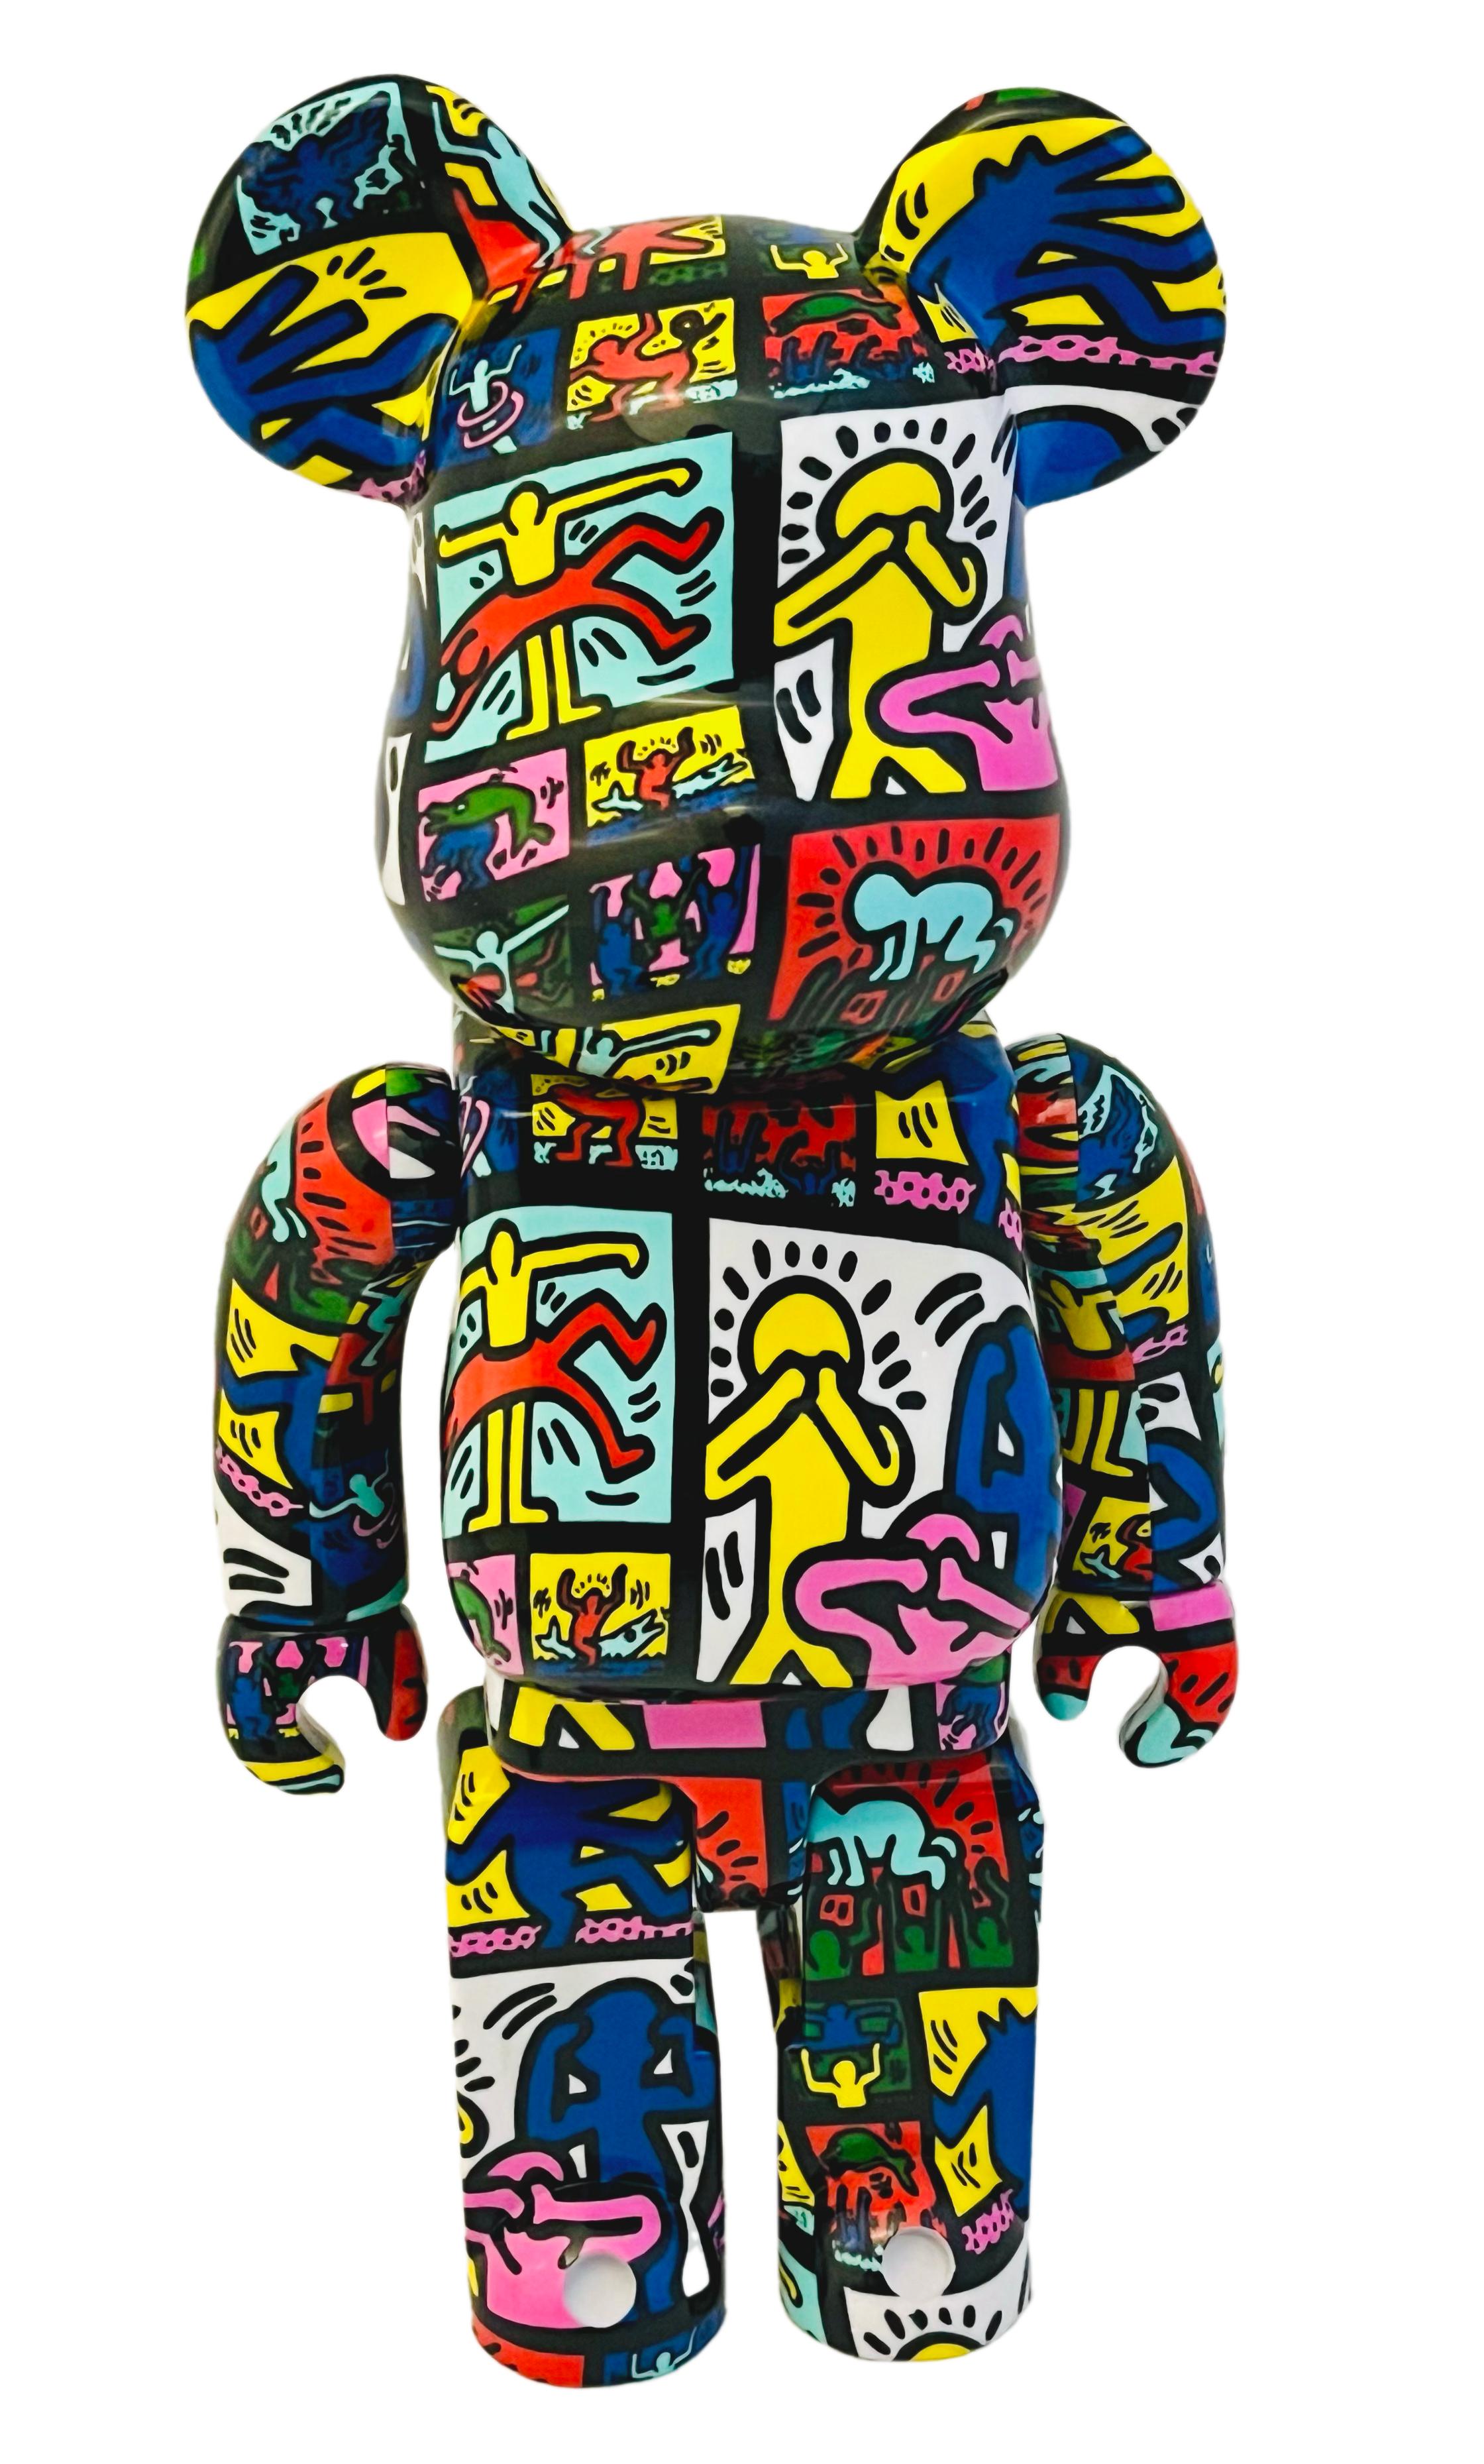 Keith Haring Bearbrick 400%  (Keith Haring BE@RBRICK)  For Sale 4